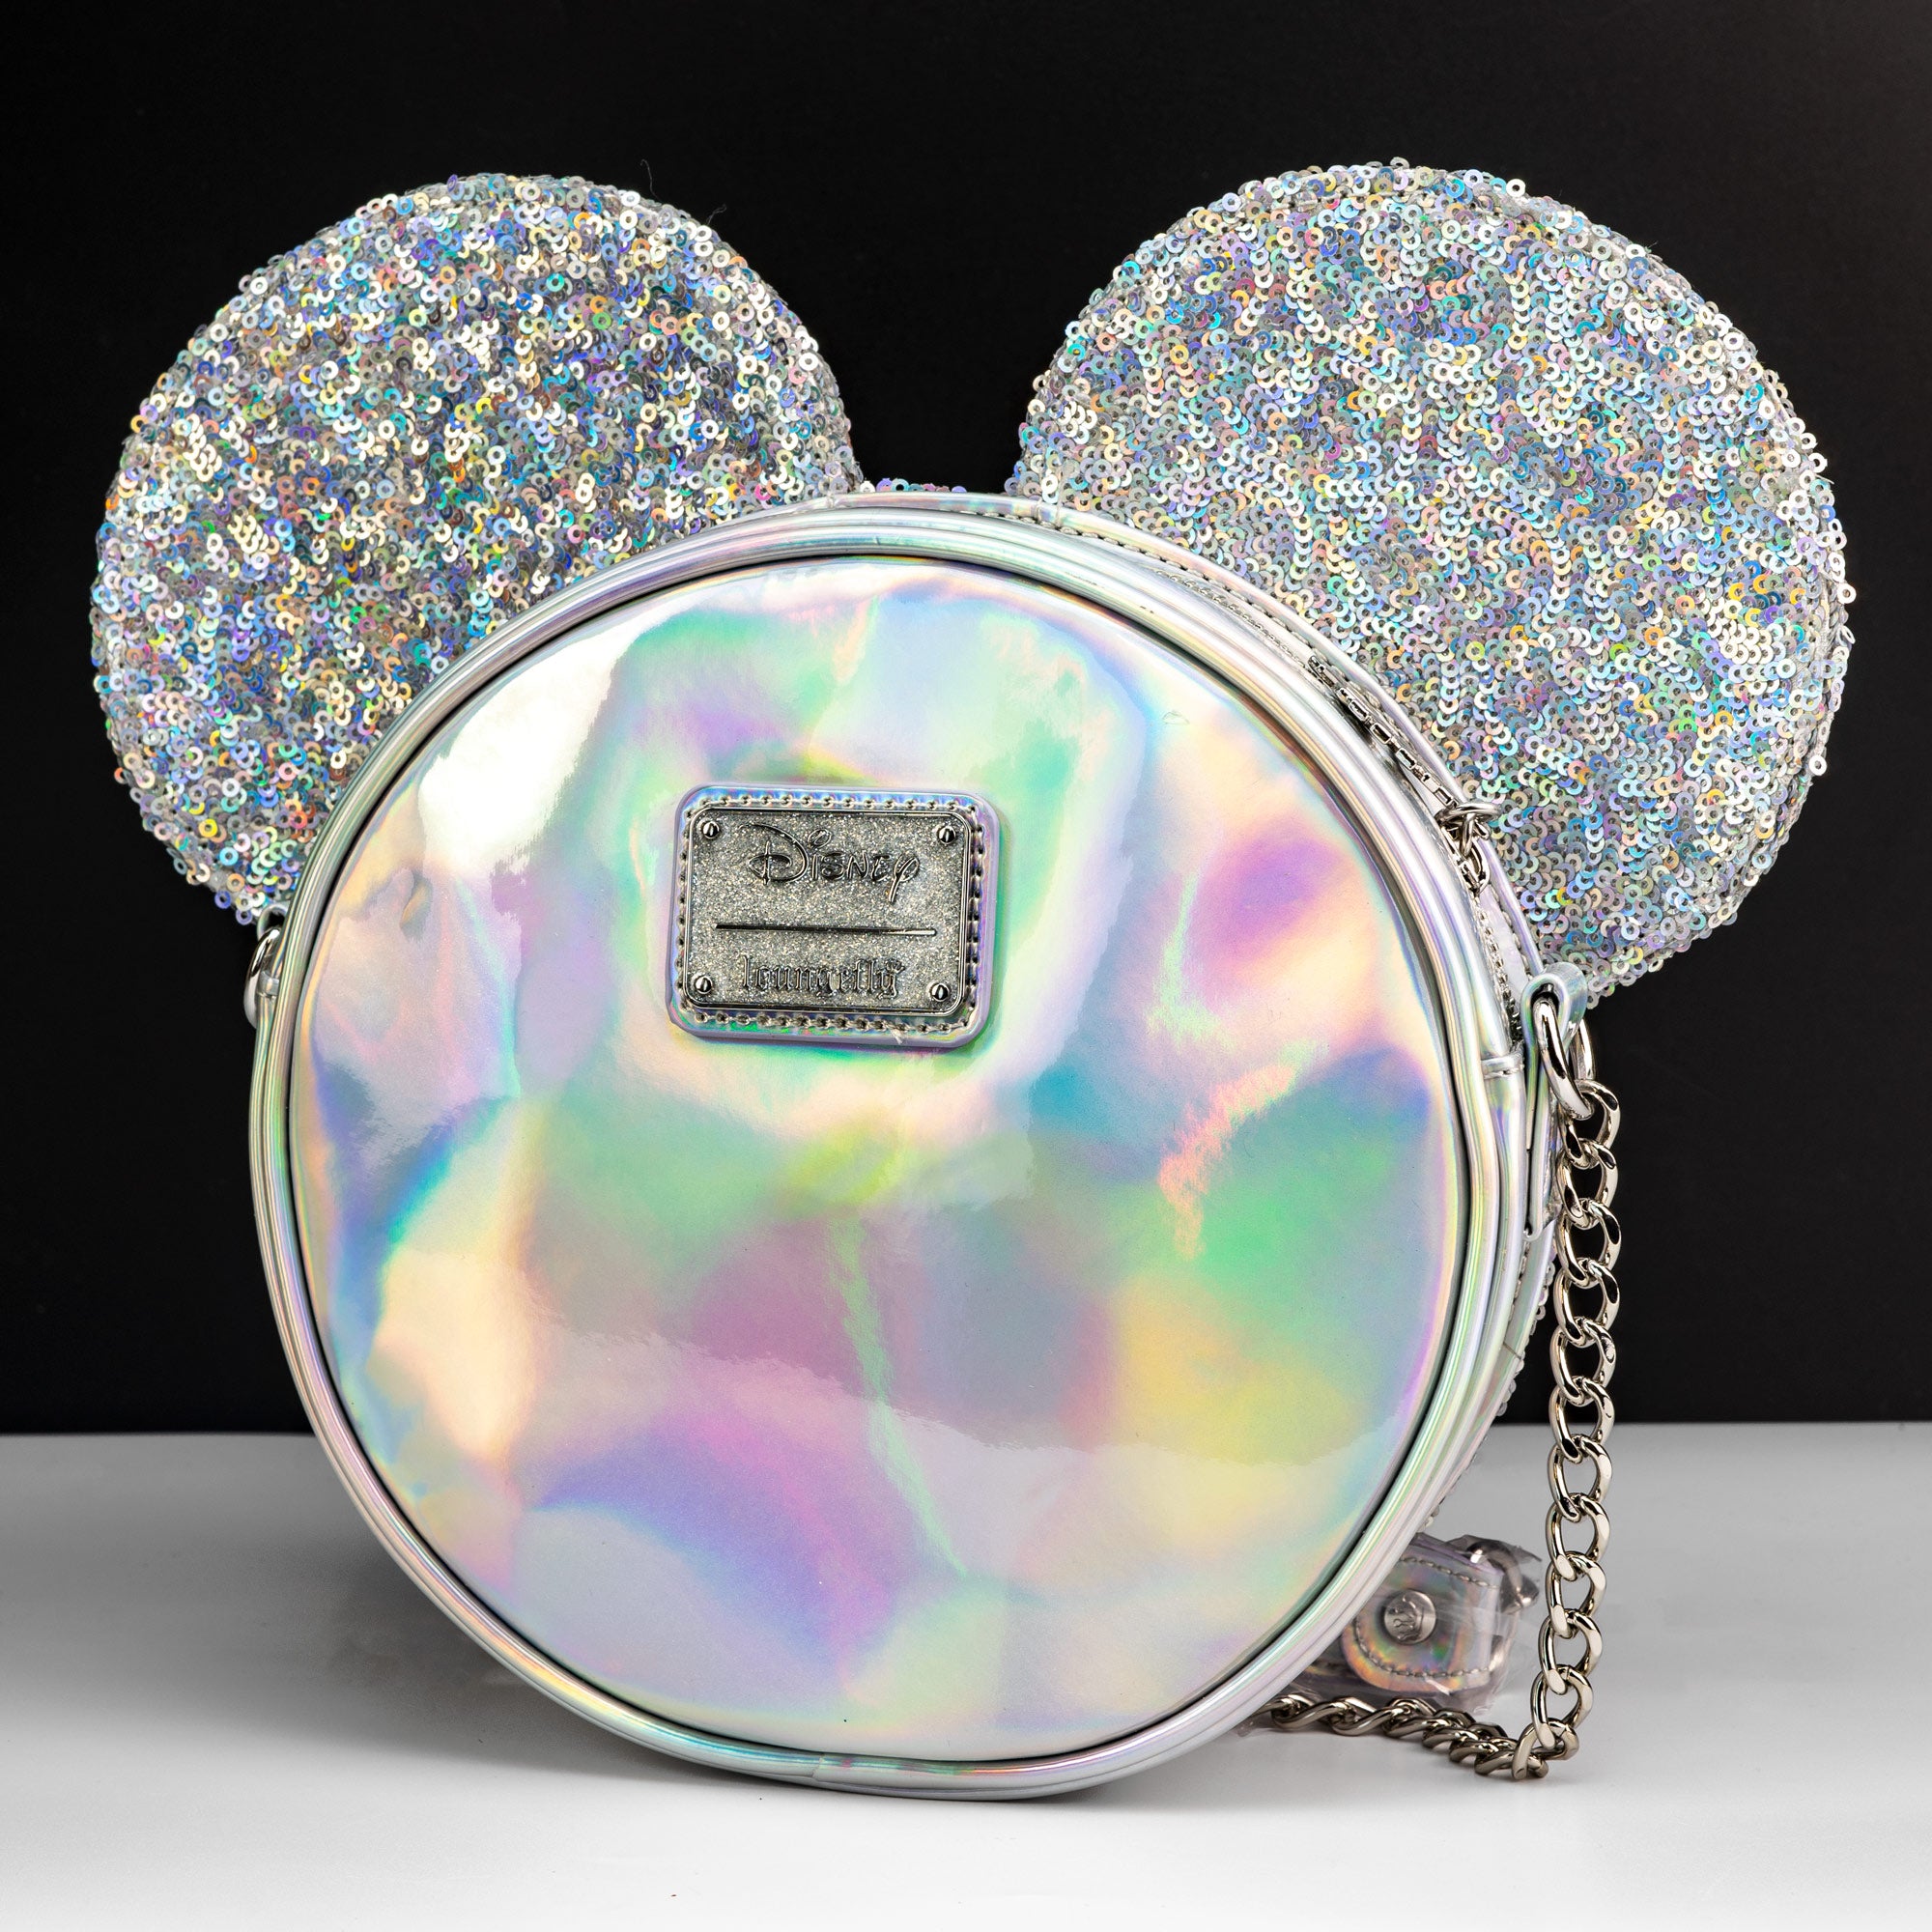 Loungefly x Disney Minnie Mouse Holographic Sequin Crossbody Bag